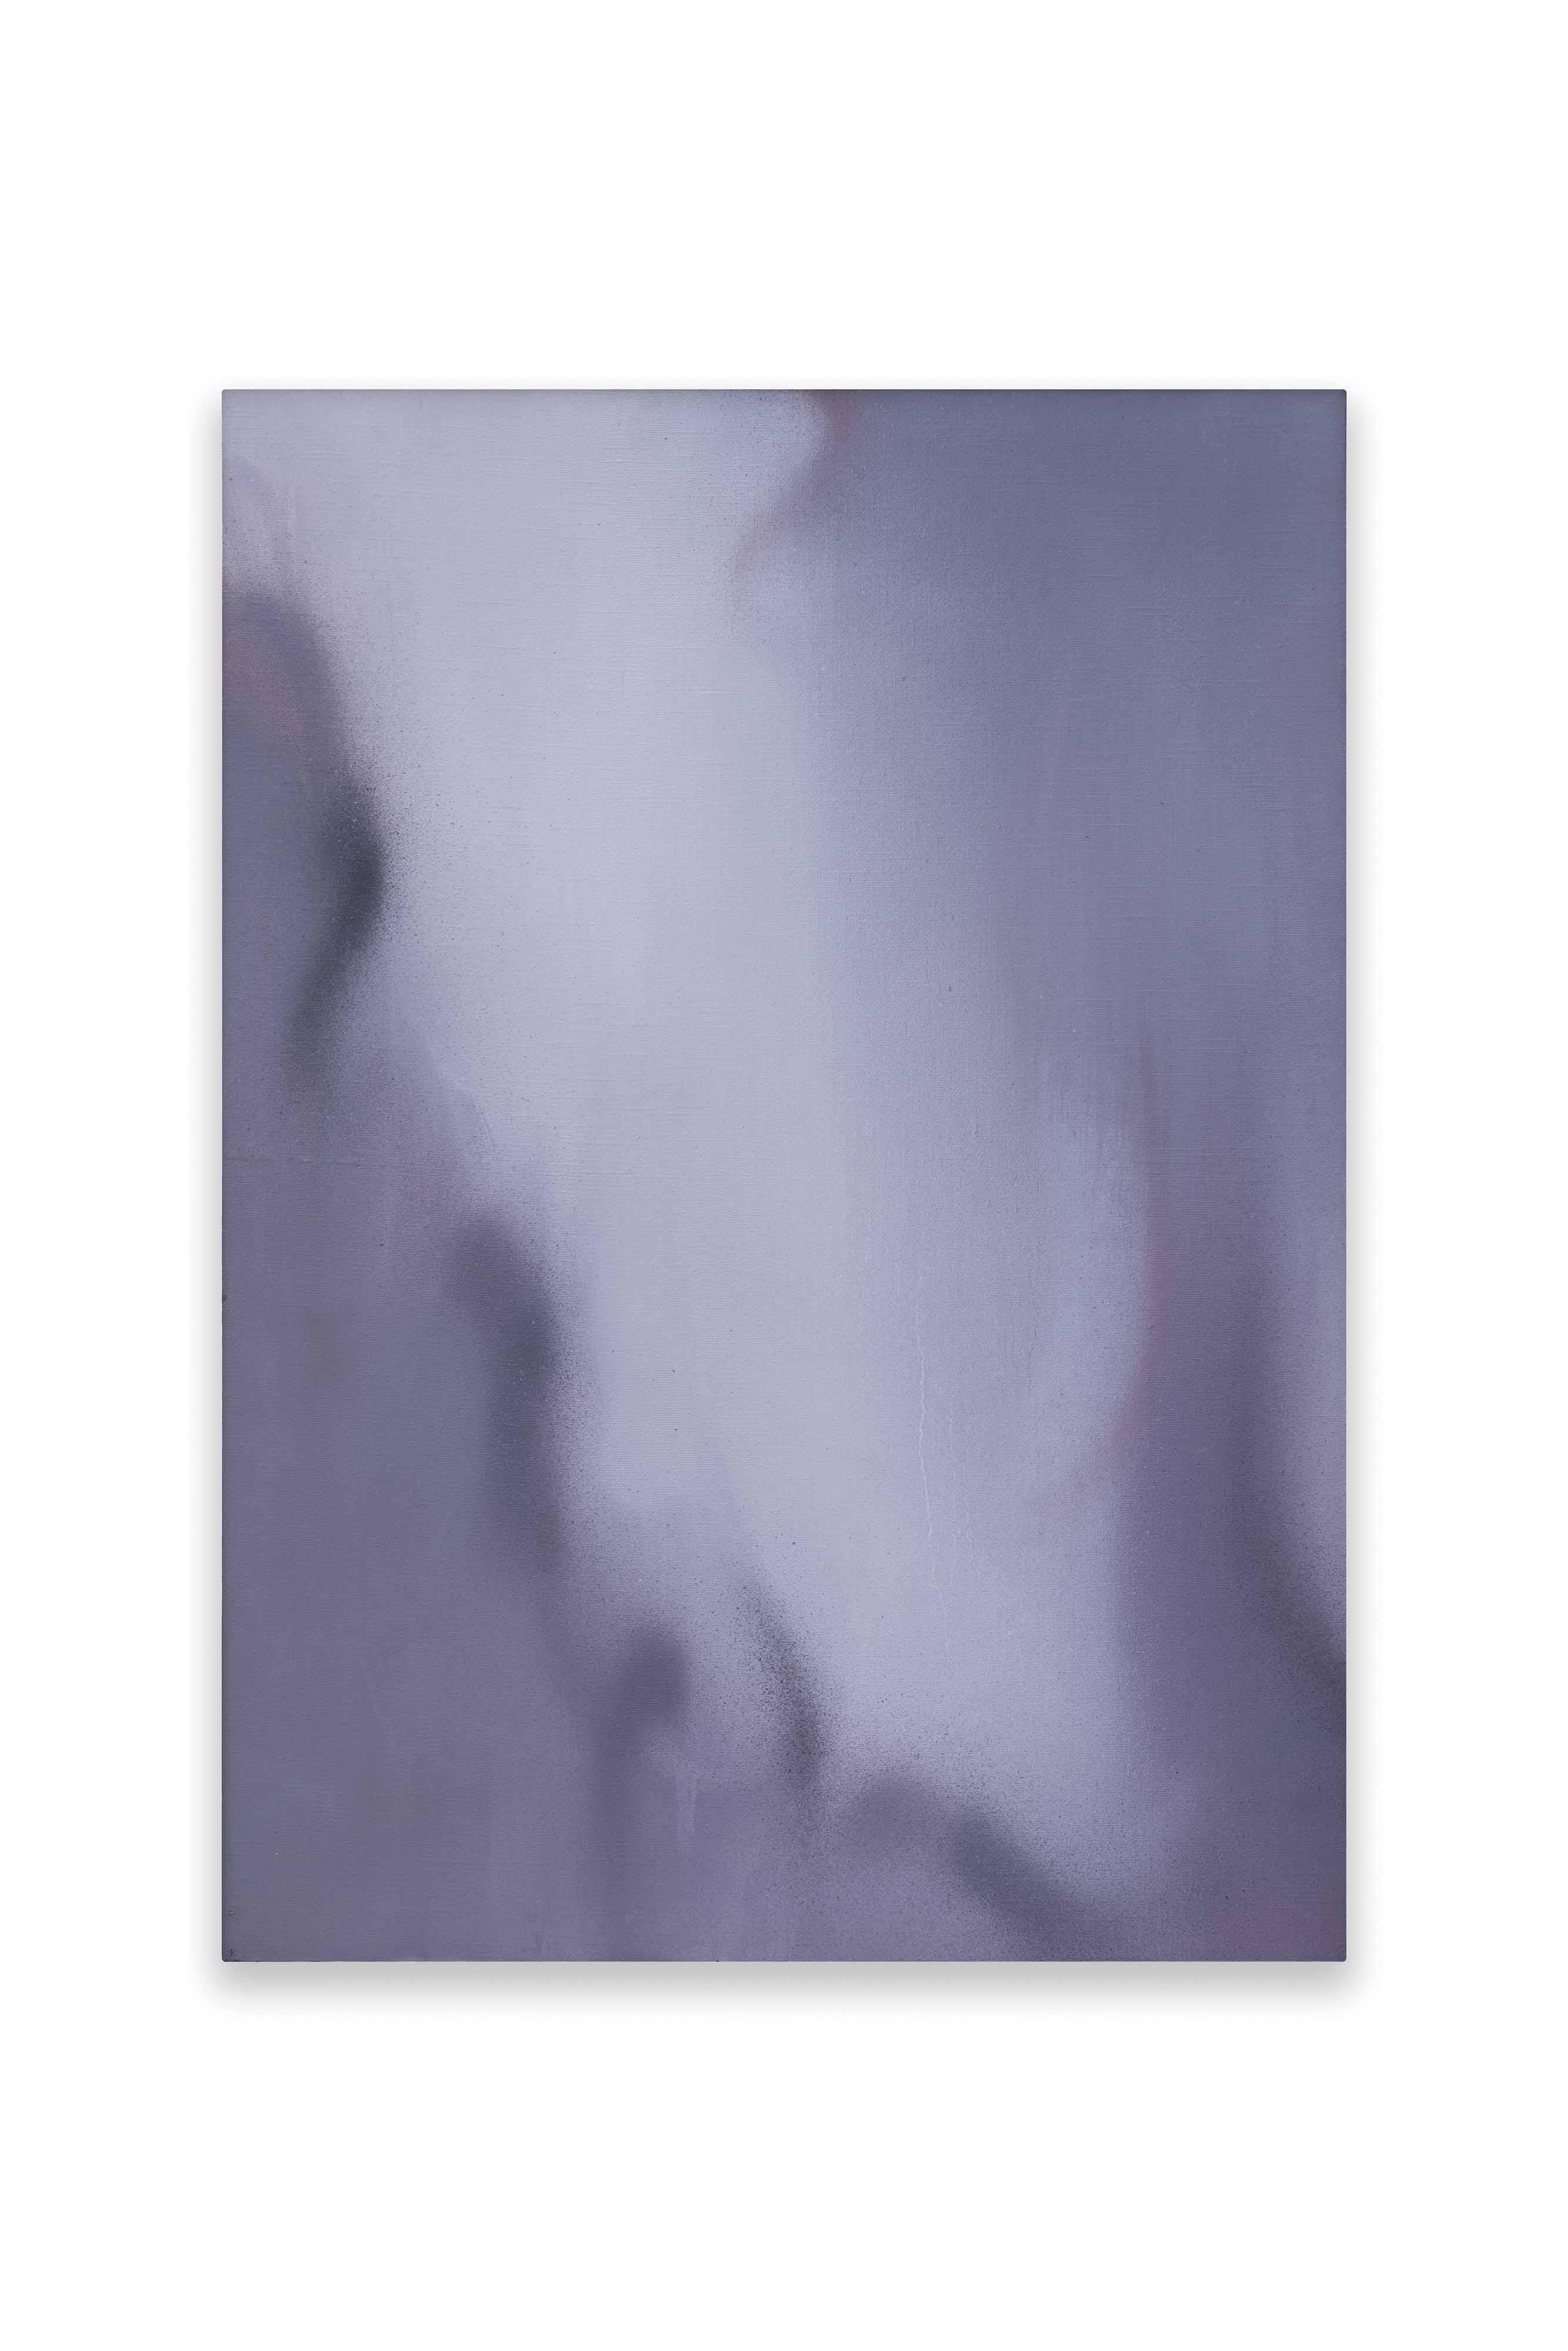 In this masterpiece Claudio Olivieri experimented with palette darkening, using a spray gun to distribute the oil and achieve an unprecedented result. In addition, this painting gives a feeling of mystical grandeur. Looking at this painting gives